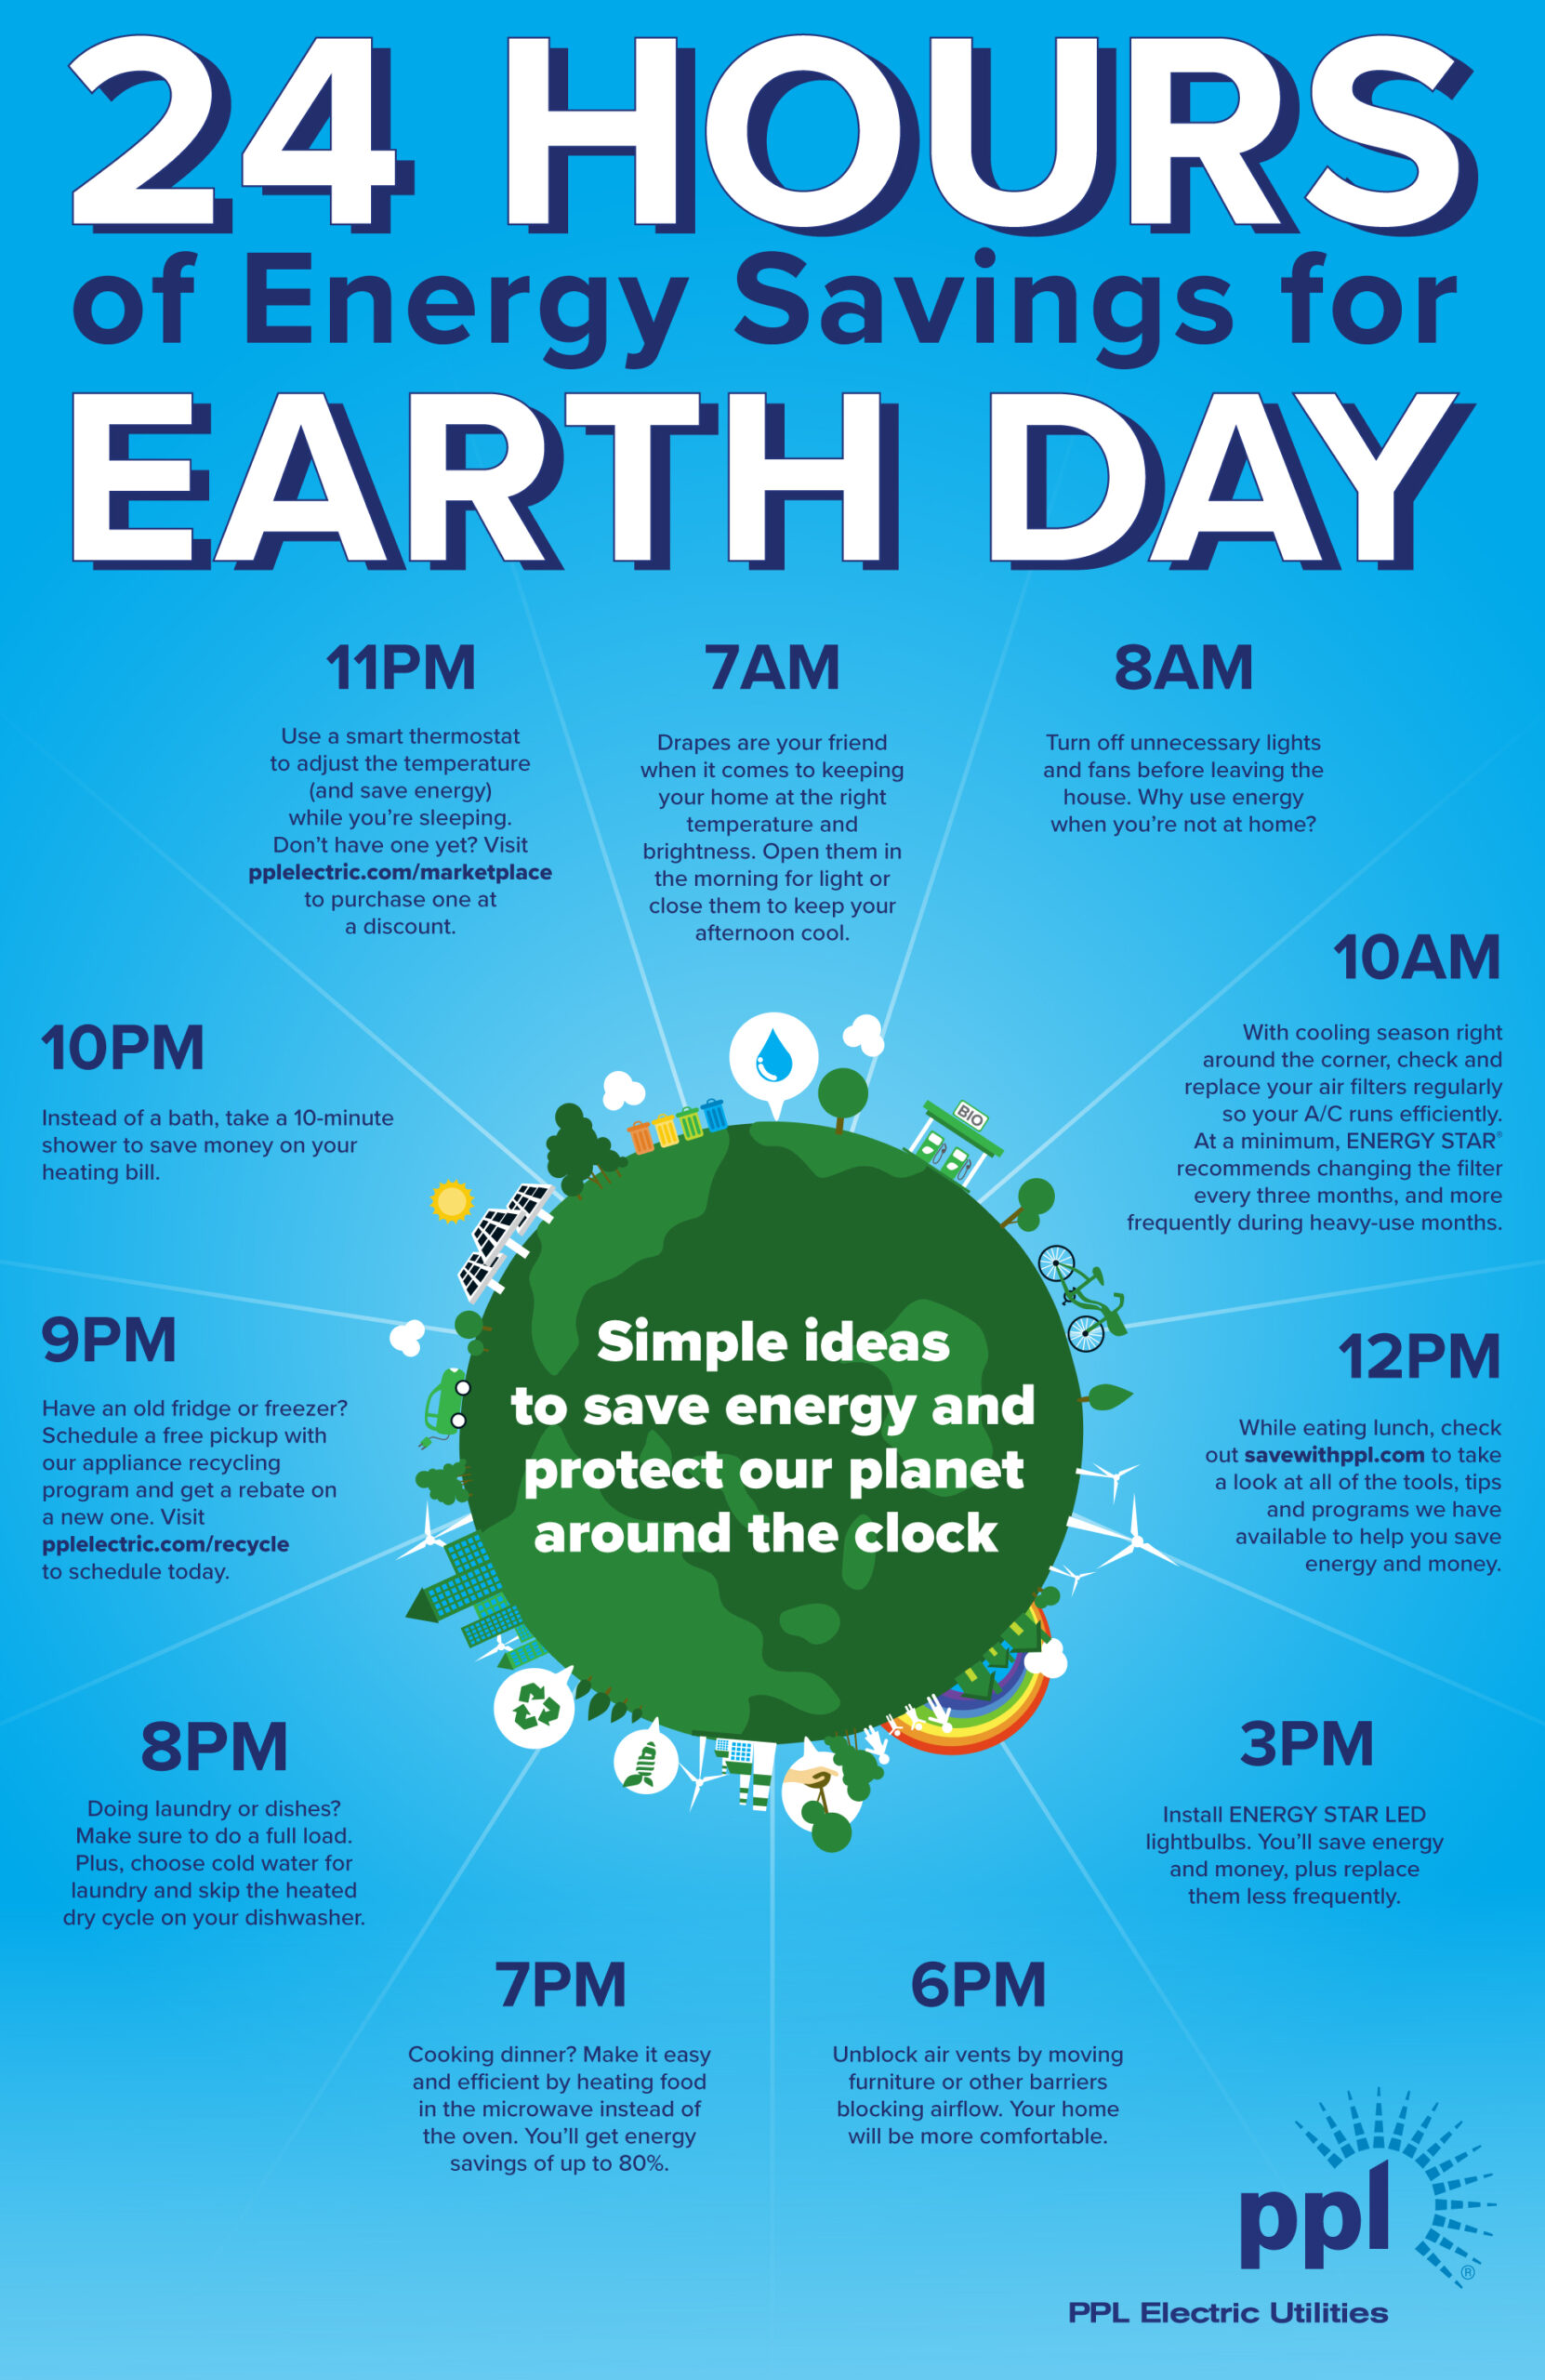 Infographic with hourly ideas and tips to save energy on Earth Day Heading: 24 Hours of Energy Savings for Earth Day. Subheading: Simple ideas to save energy and protect our planet around the clock. 7 am: Open or close drapes to keep your home at the right temperature and brightness. 8 am: Turn off unnecessary lights and fans. 10 am: Check and replace your air filters regularly so your A/C runs efficiently. 12 pm: Check out savewithppl.com to see tools, tips and programs that help you save energy and money. 3 pm: Install ENERGY STAR LED lightbulbs. You’ll save energy and money, plus replace them less frequently. 6 pm: Unblock air vents by moving furniture or other barriers blocking airflow. 7 pm: Make dinner energy-efficient by heating food in the microwave instead of the oven. You’ll get energy savings of up to 80%. 8 pm: Do full loads of laundry or dishes. Choose cold water for laundry and skip the heated dry cycle on your dishwasher. 9 pm: Have an old fridge or freezer? Schedule a free pickup with our appliance recycling program and get a rebate on a new one. Visit pplelectric.com/recycle to schedule today. 10 pm: Take a 10-minute shower instead of a bath and save money on your heating bill. 11 pm: Use a smart thermostat. Don’t have one yet? Visit pplelectric.com/marketplace to purchase one at a discount. 